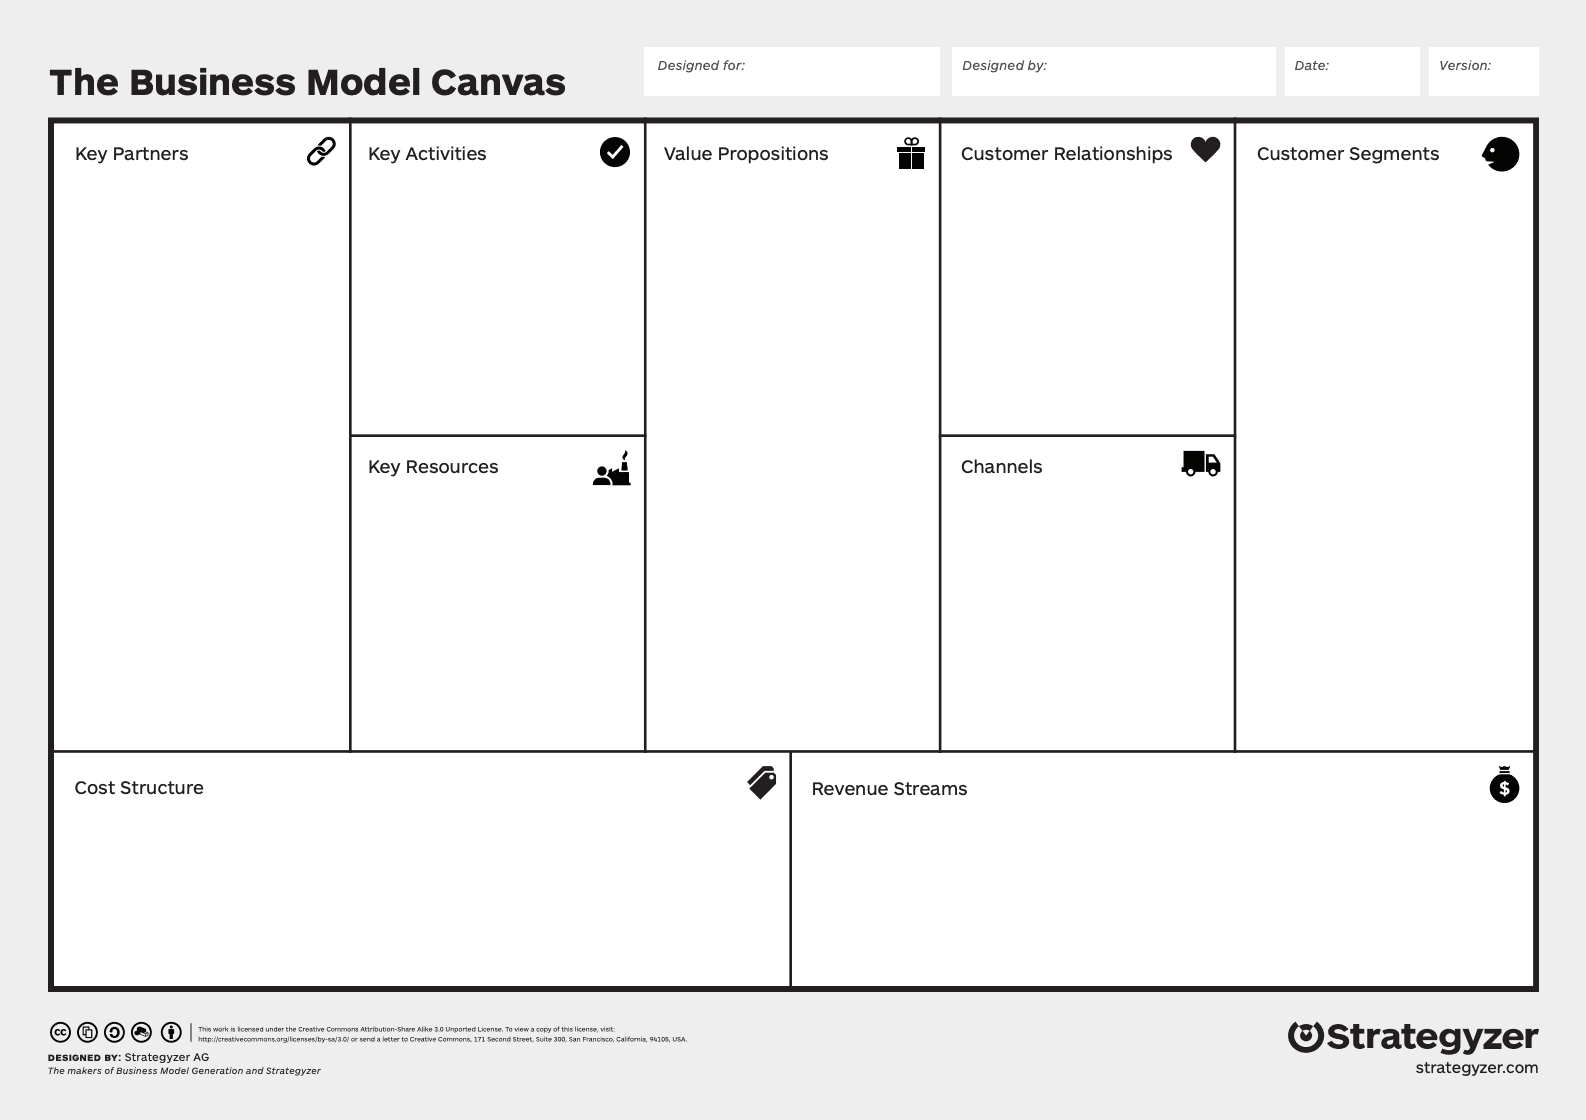 Business Model Canvas example by Strategyzer